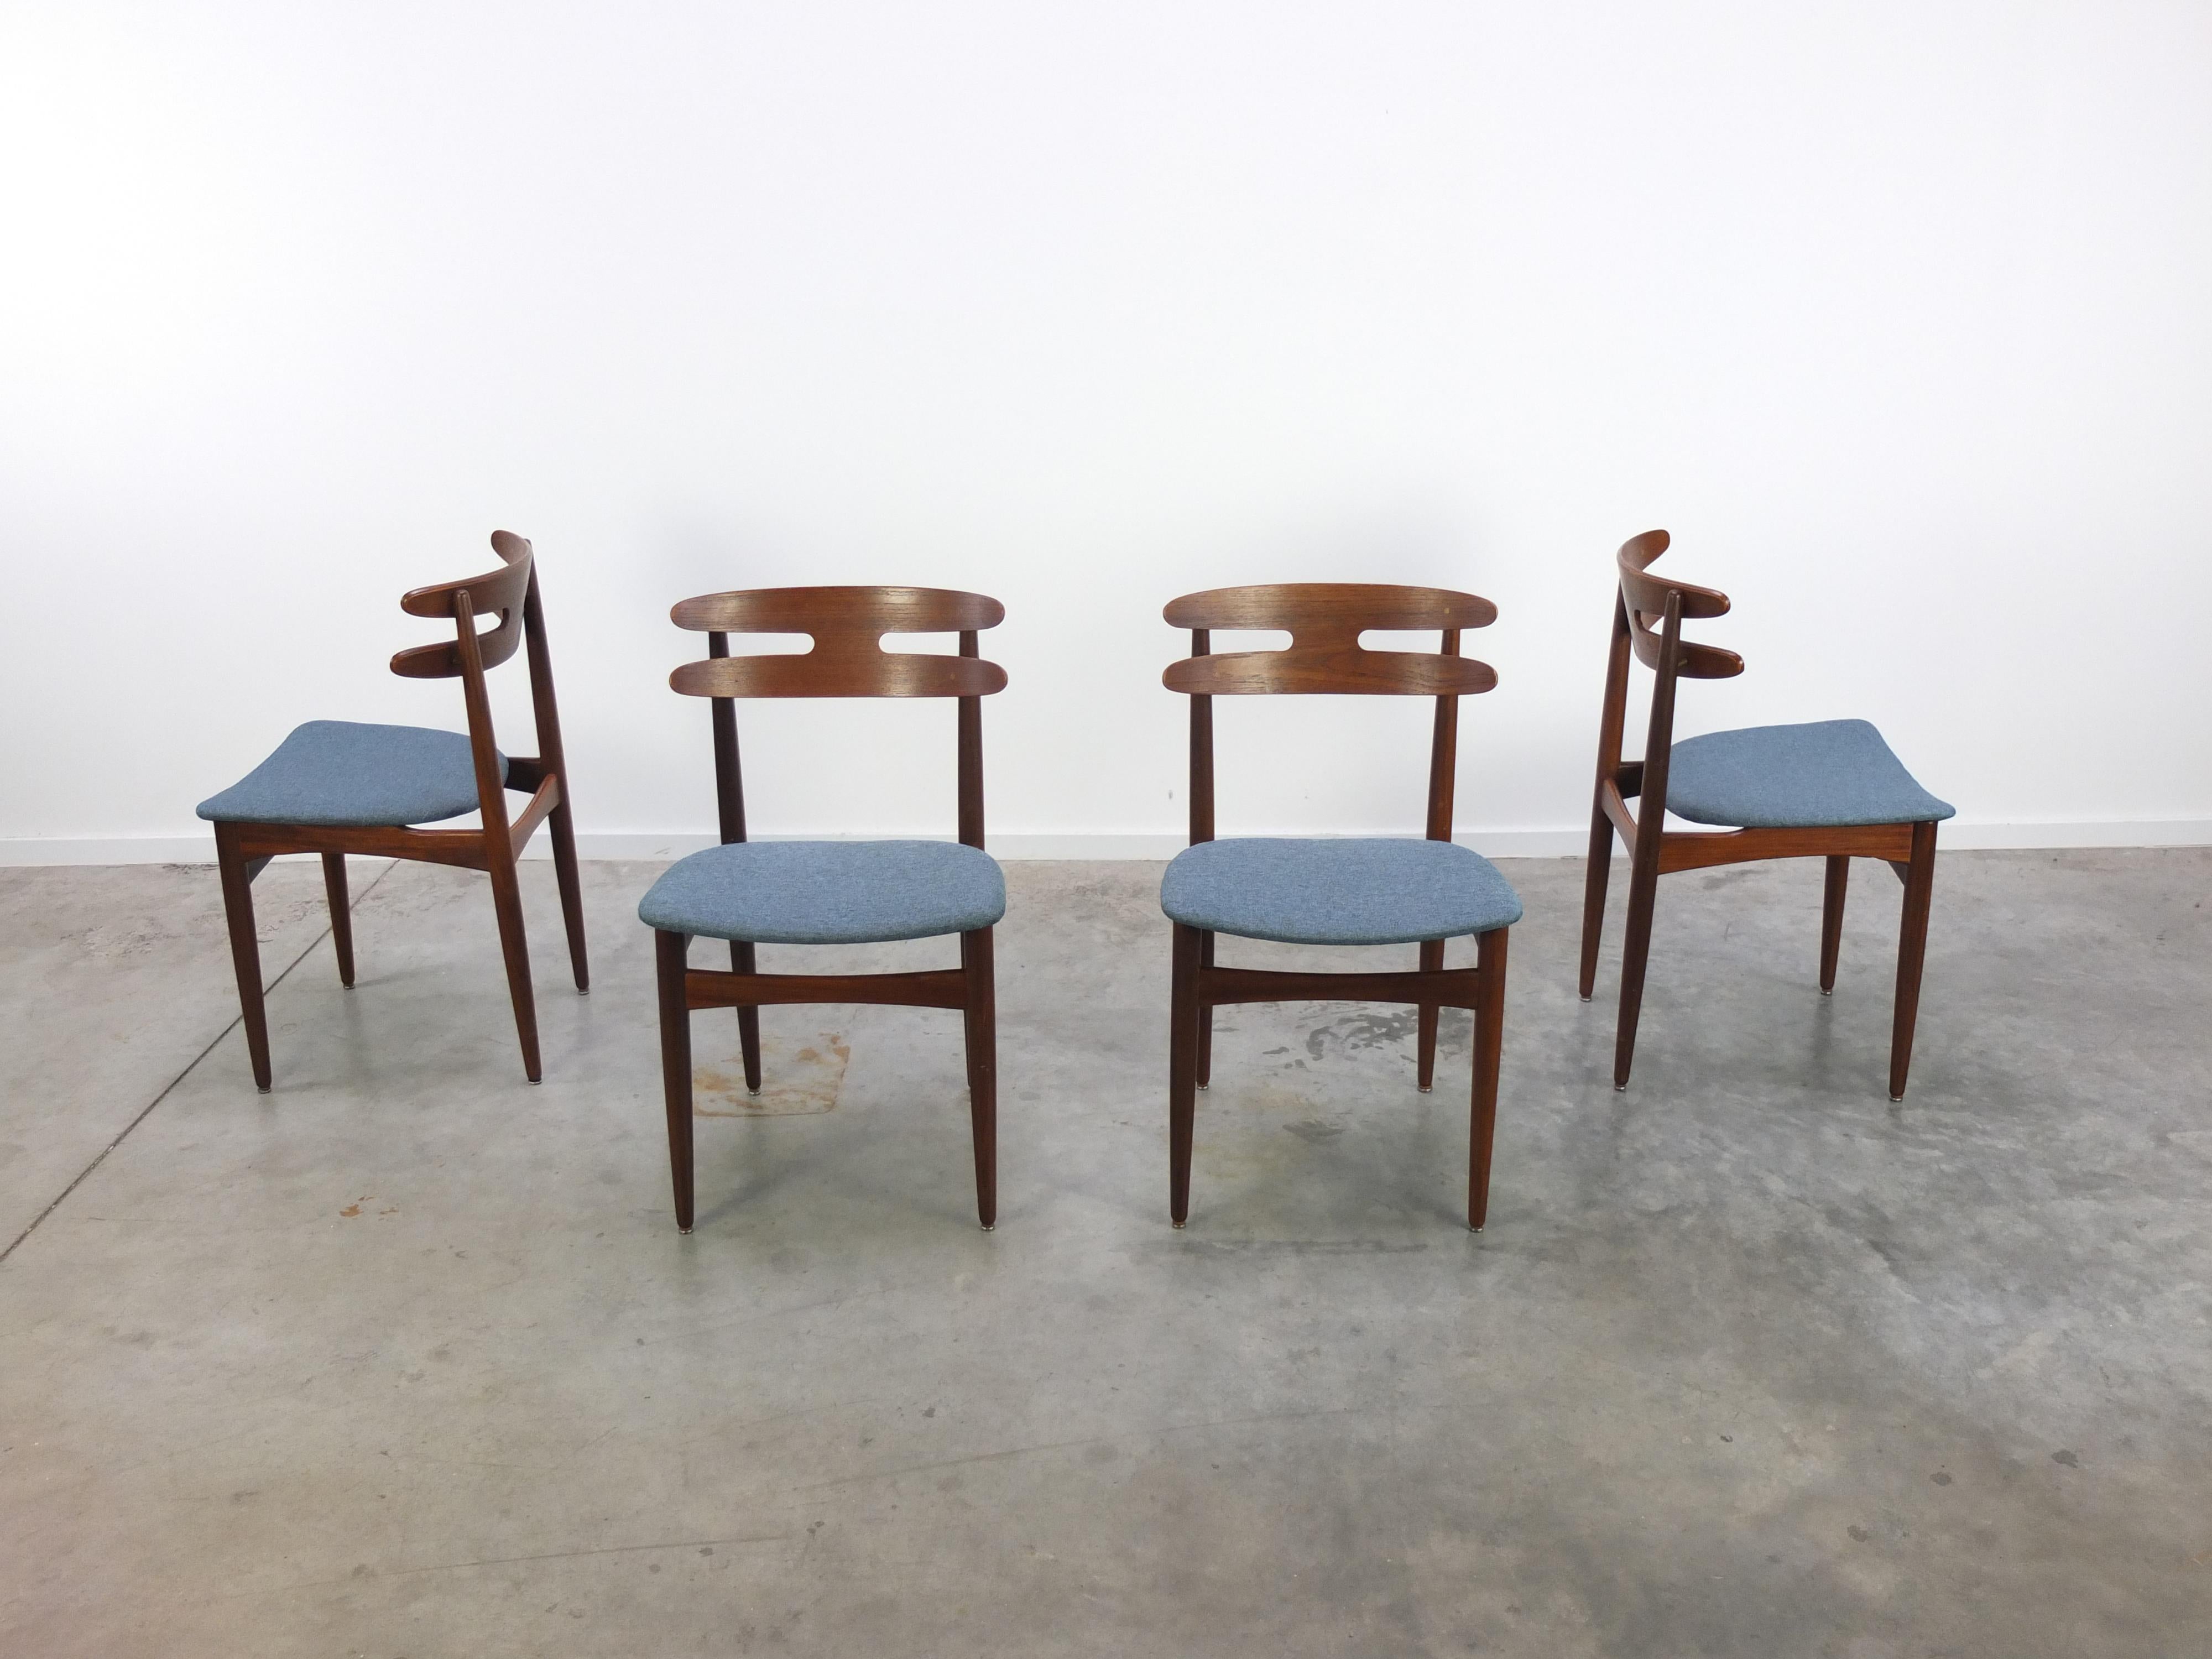 20th Century Set of 4 Teak 'Model 178' Dining Chairs by Johannes Andersen for Bramin, 1960s For Sale